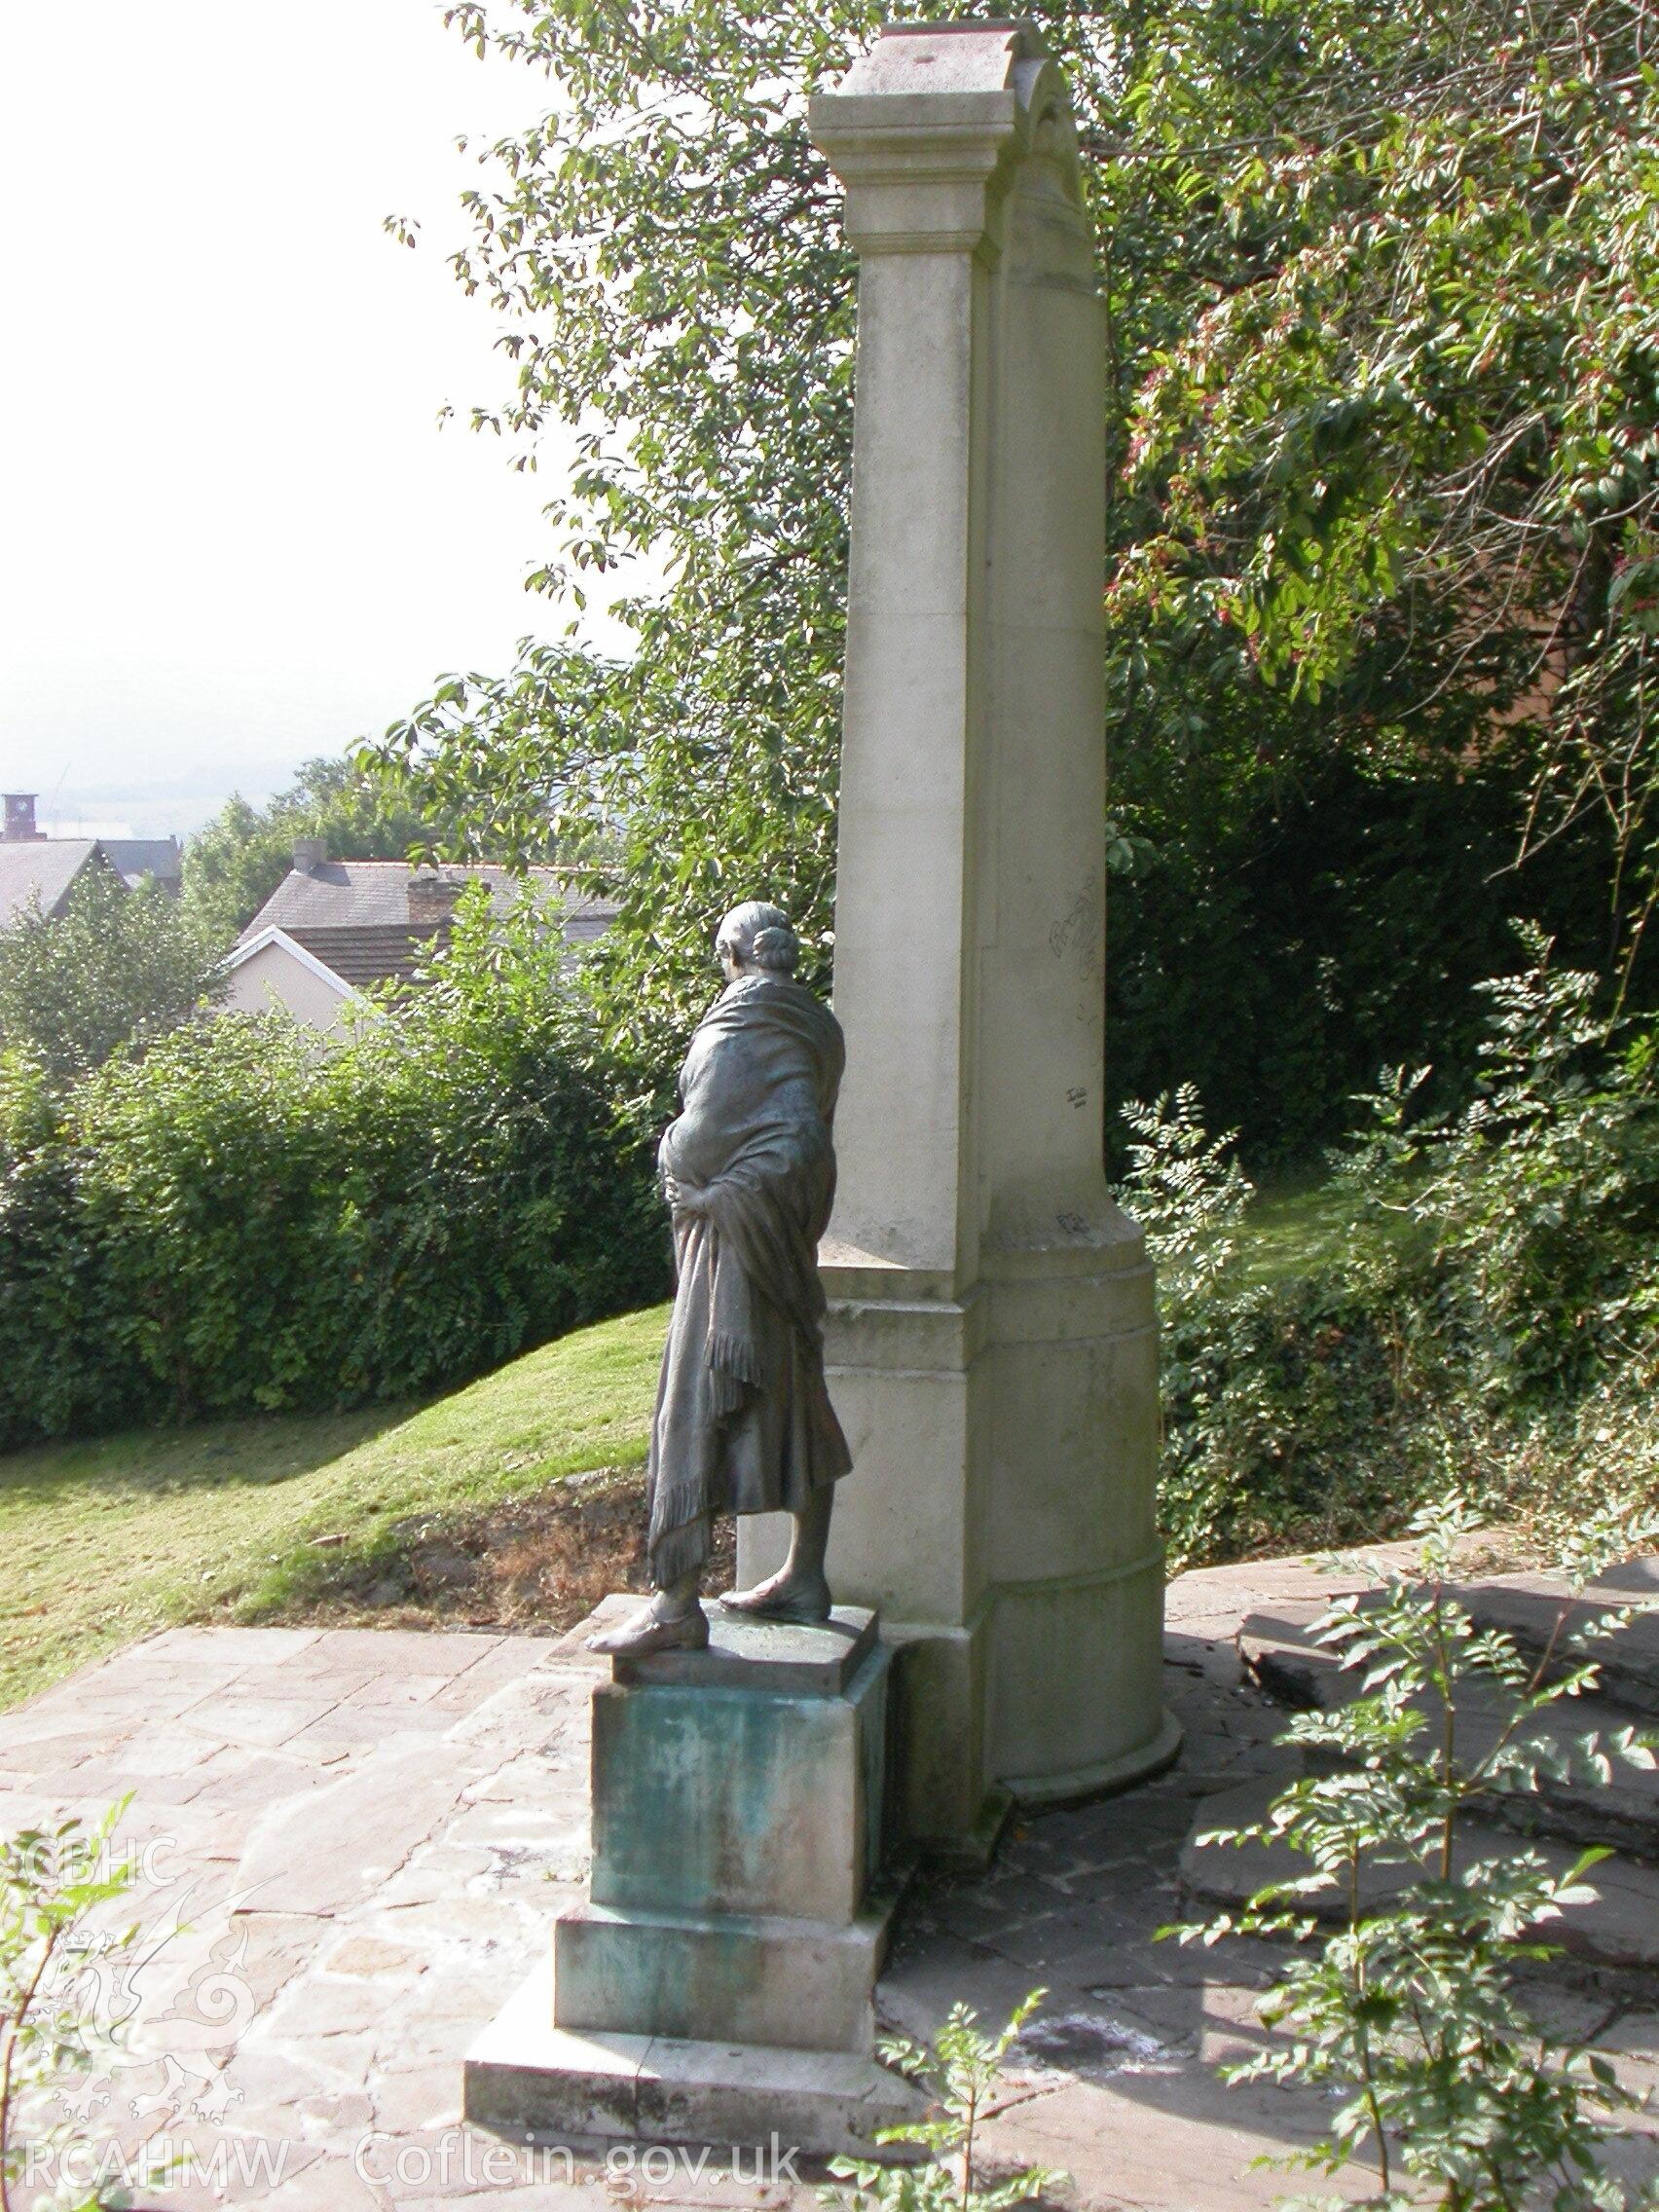 View from rear of the Merthyr Tydfil War Memorial (with female figure visible) in Pontmorlais, Merthyr Tydfil. Produced by Geoff Ward of RCAHMW.